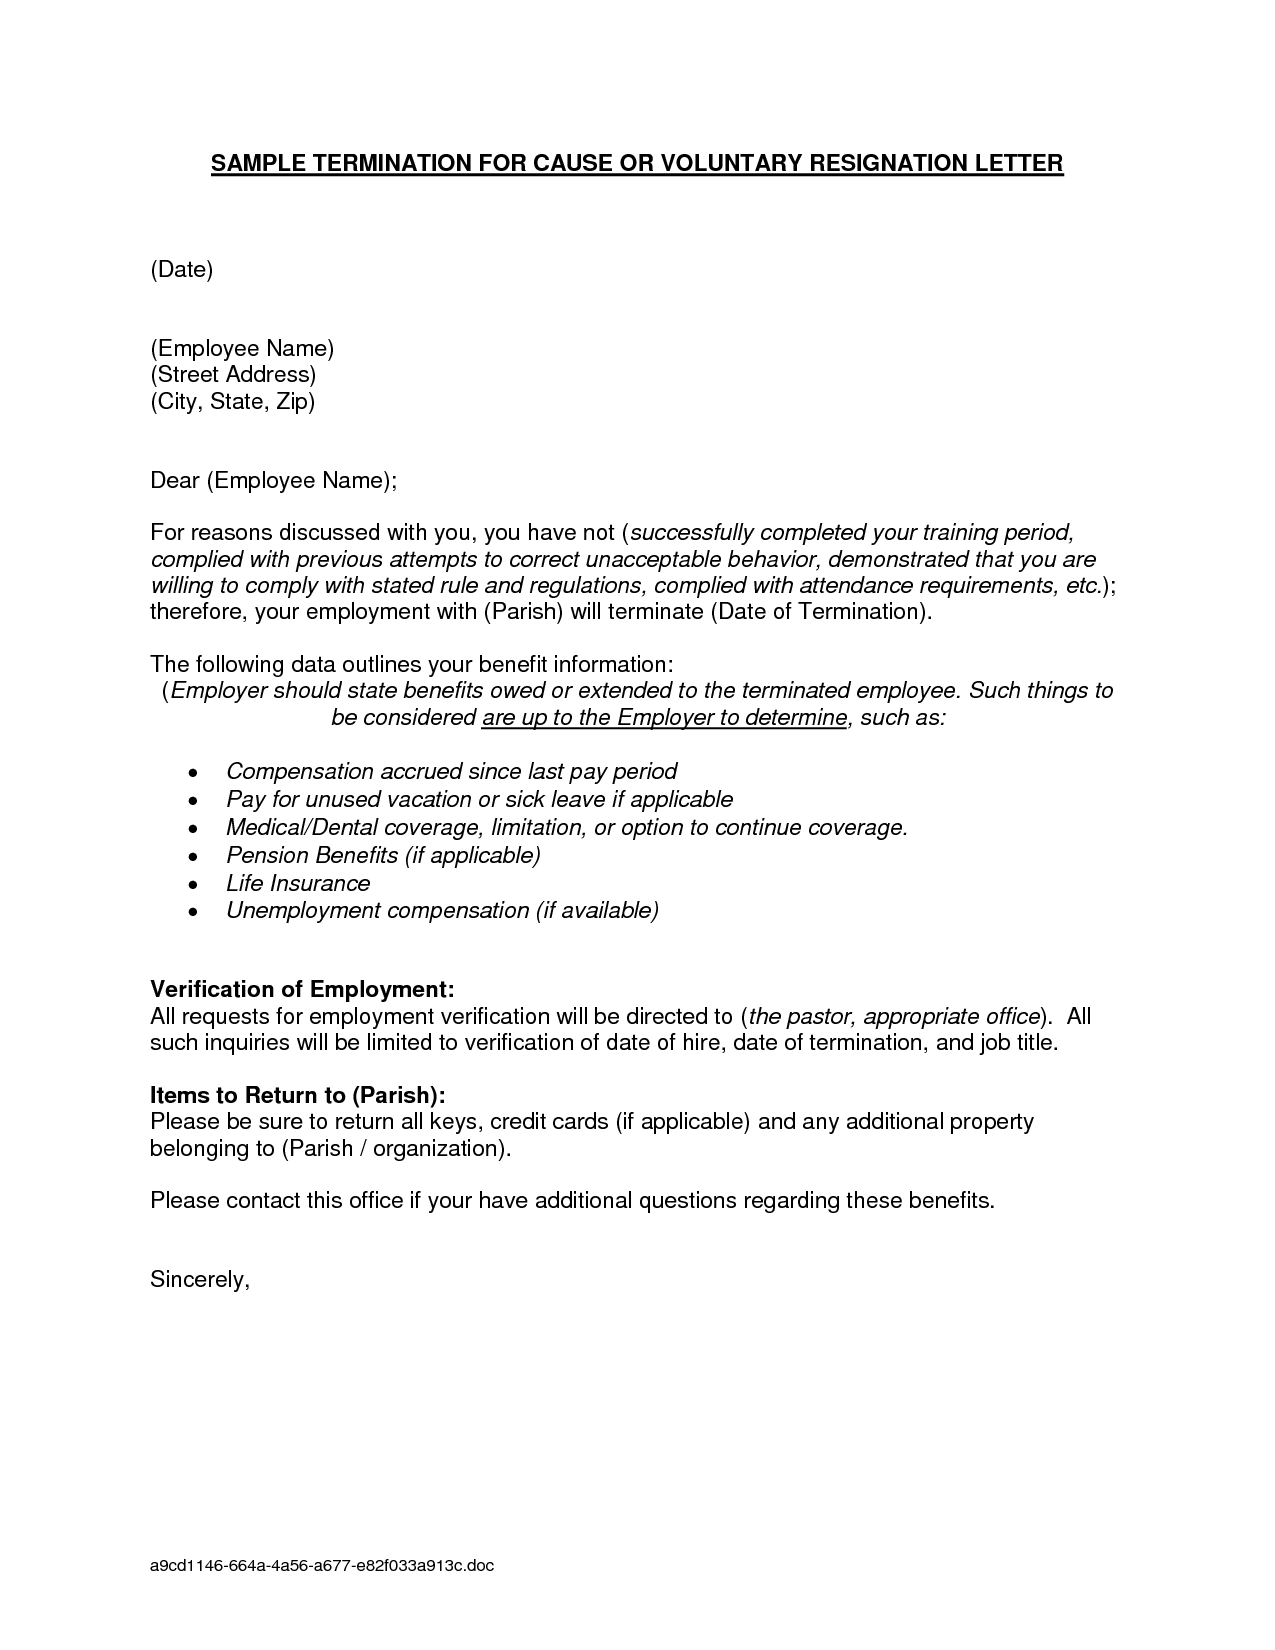 Probation Termination Letter Template Collection - Letter Template